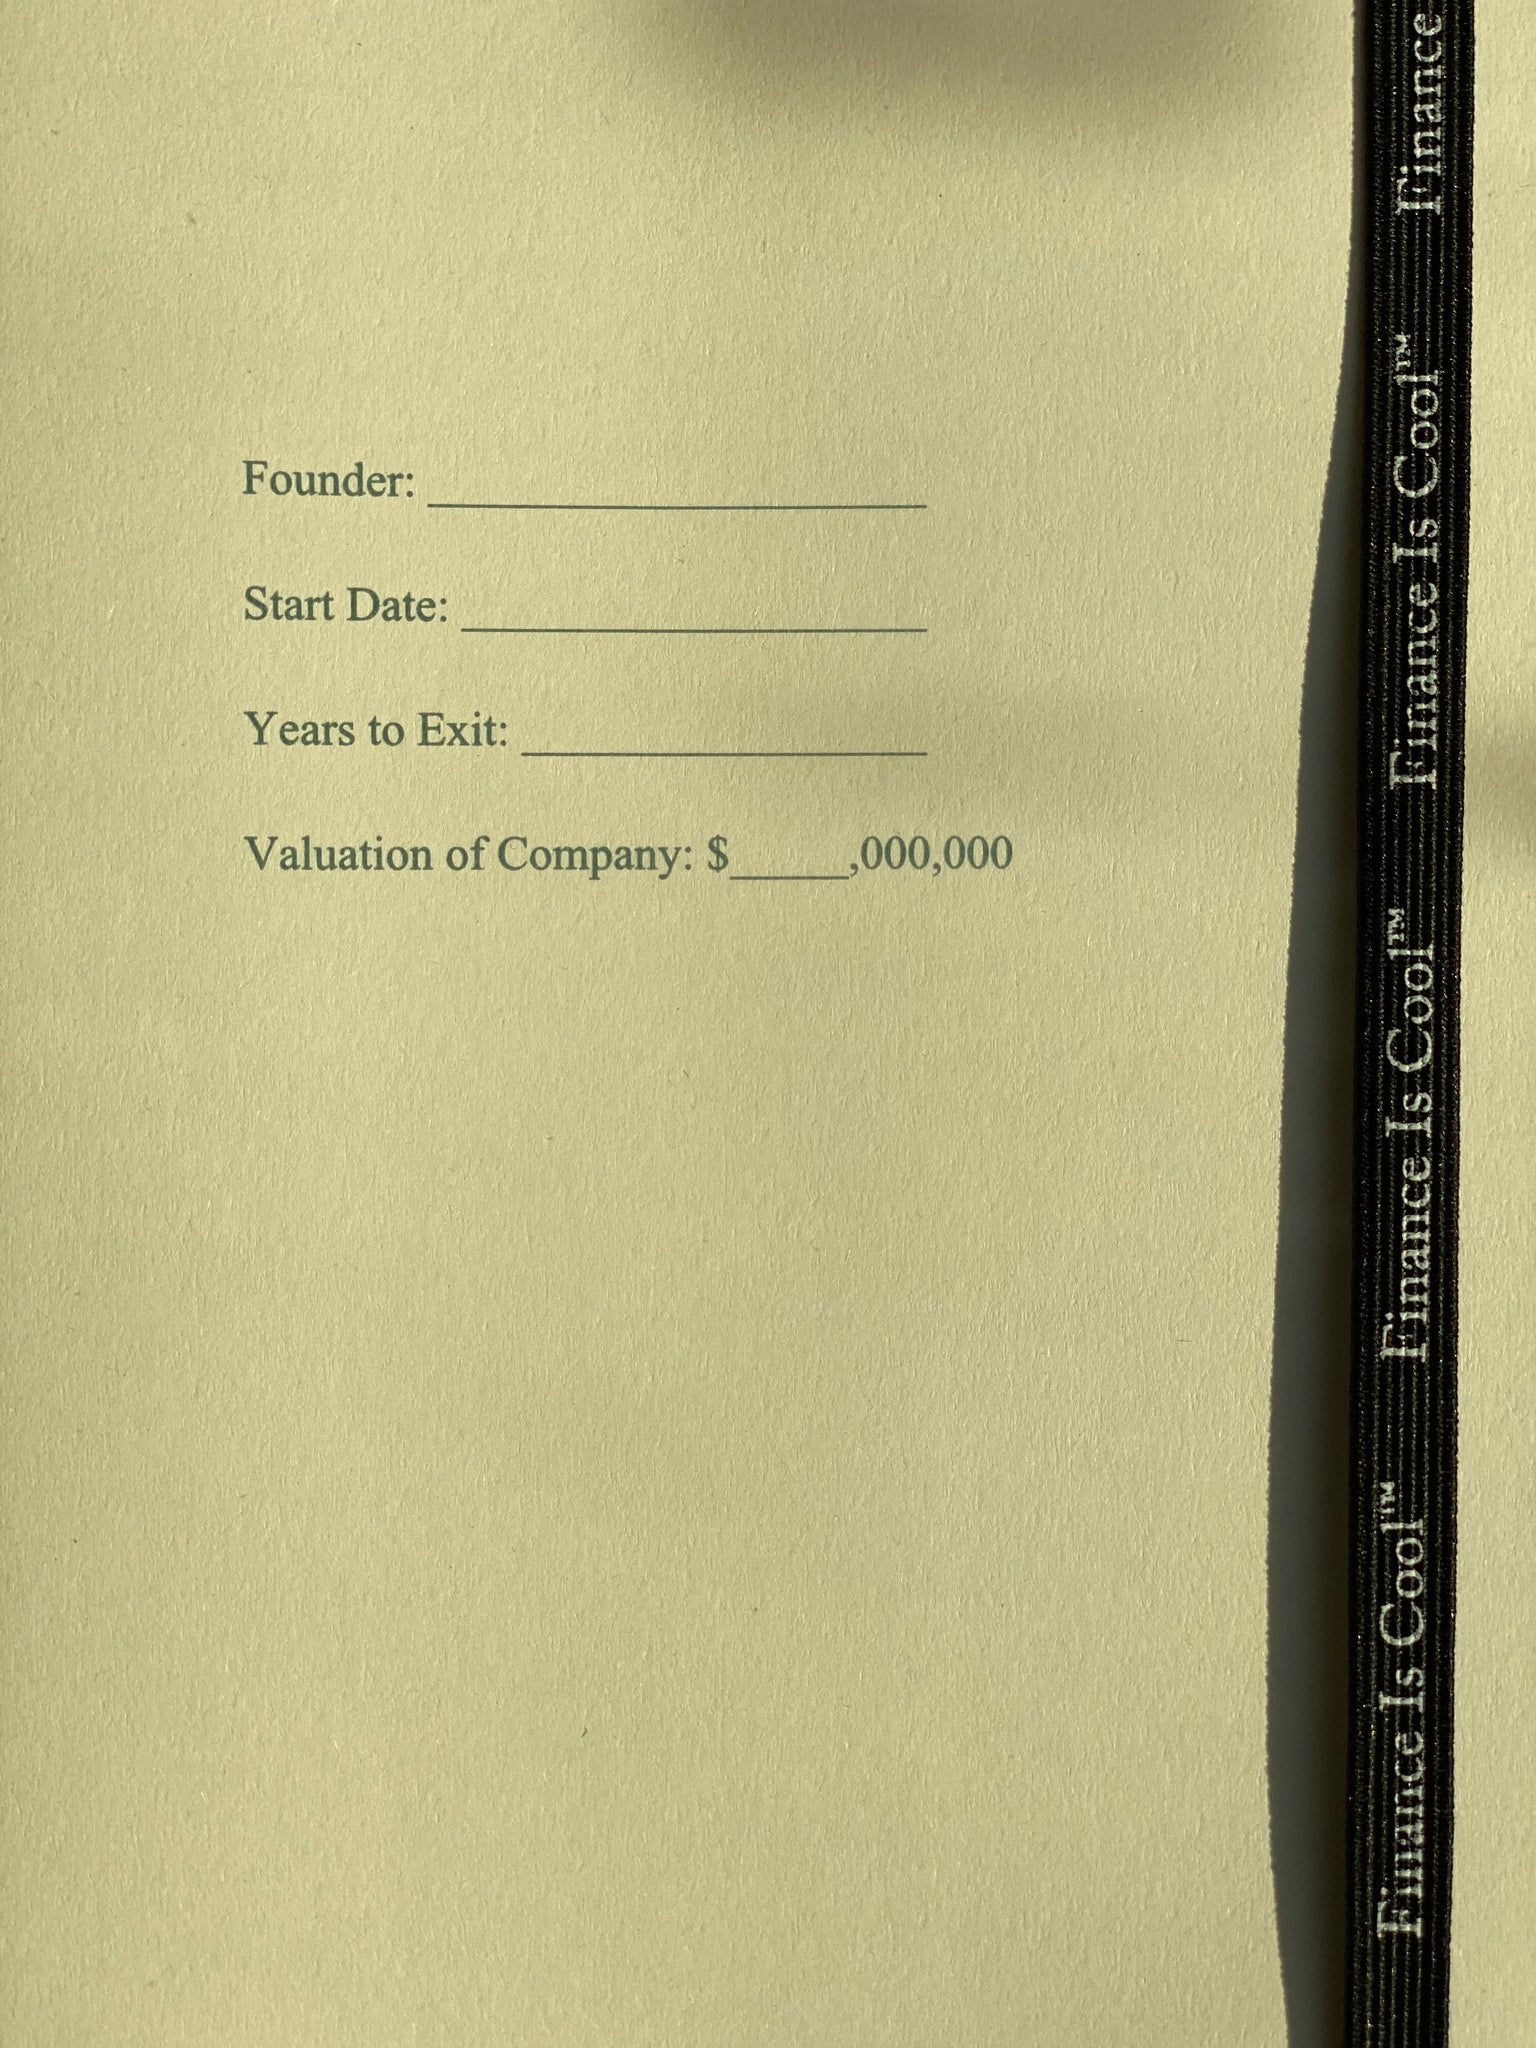 Startup Ideas Notebook - Finance Is Cool